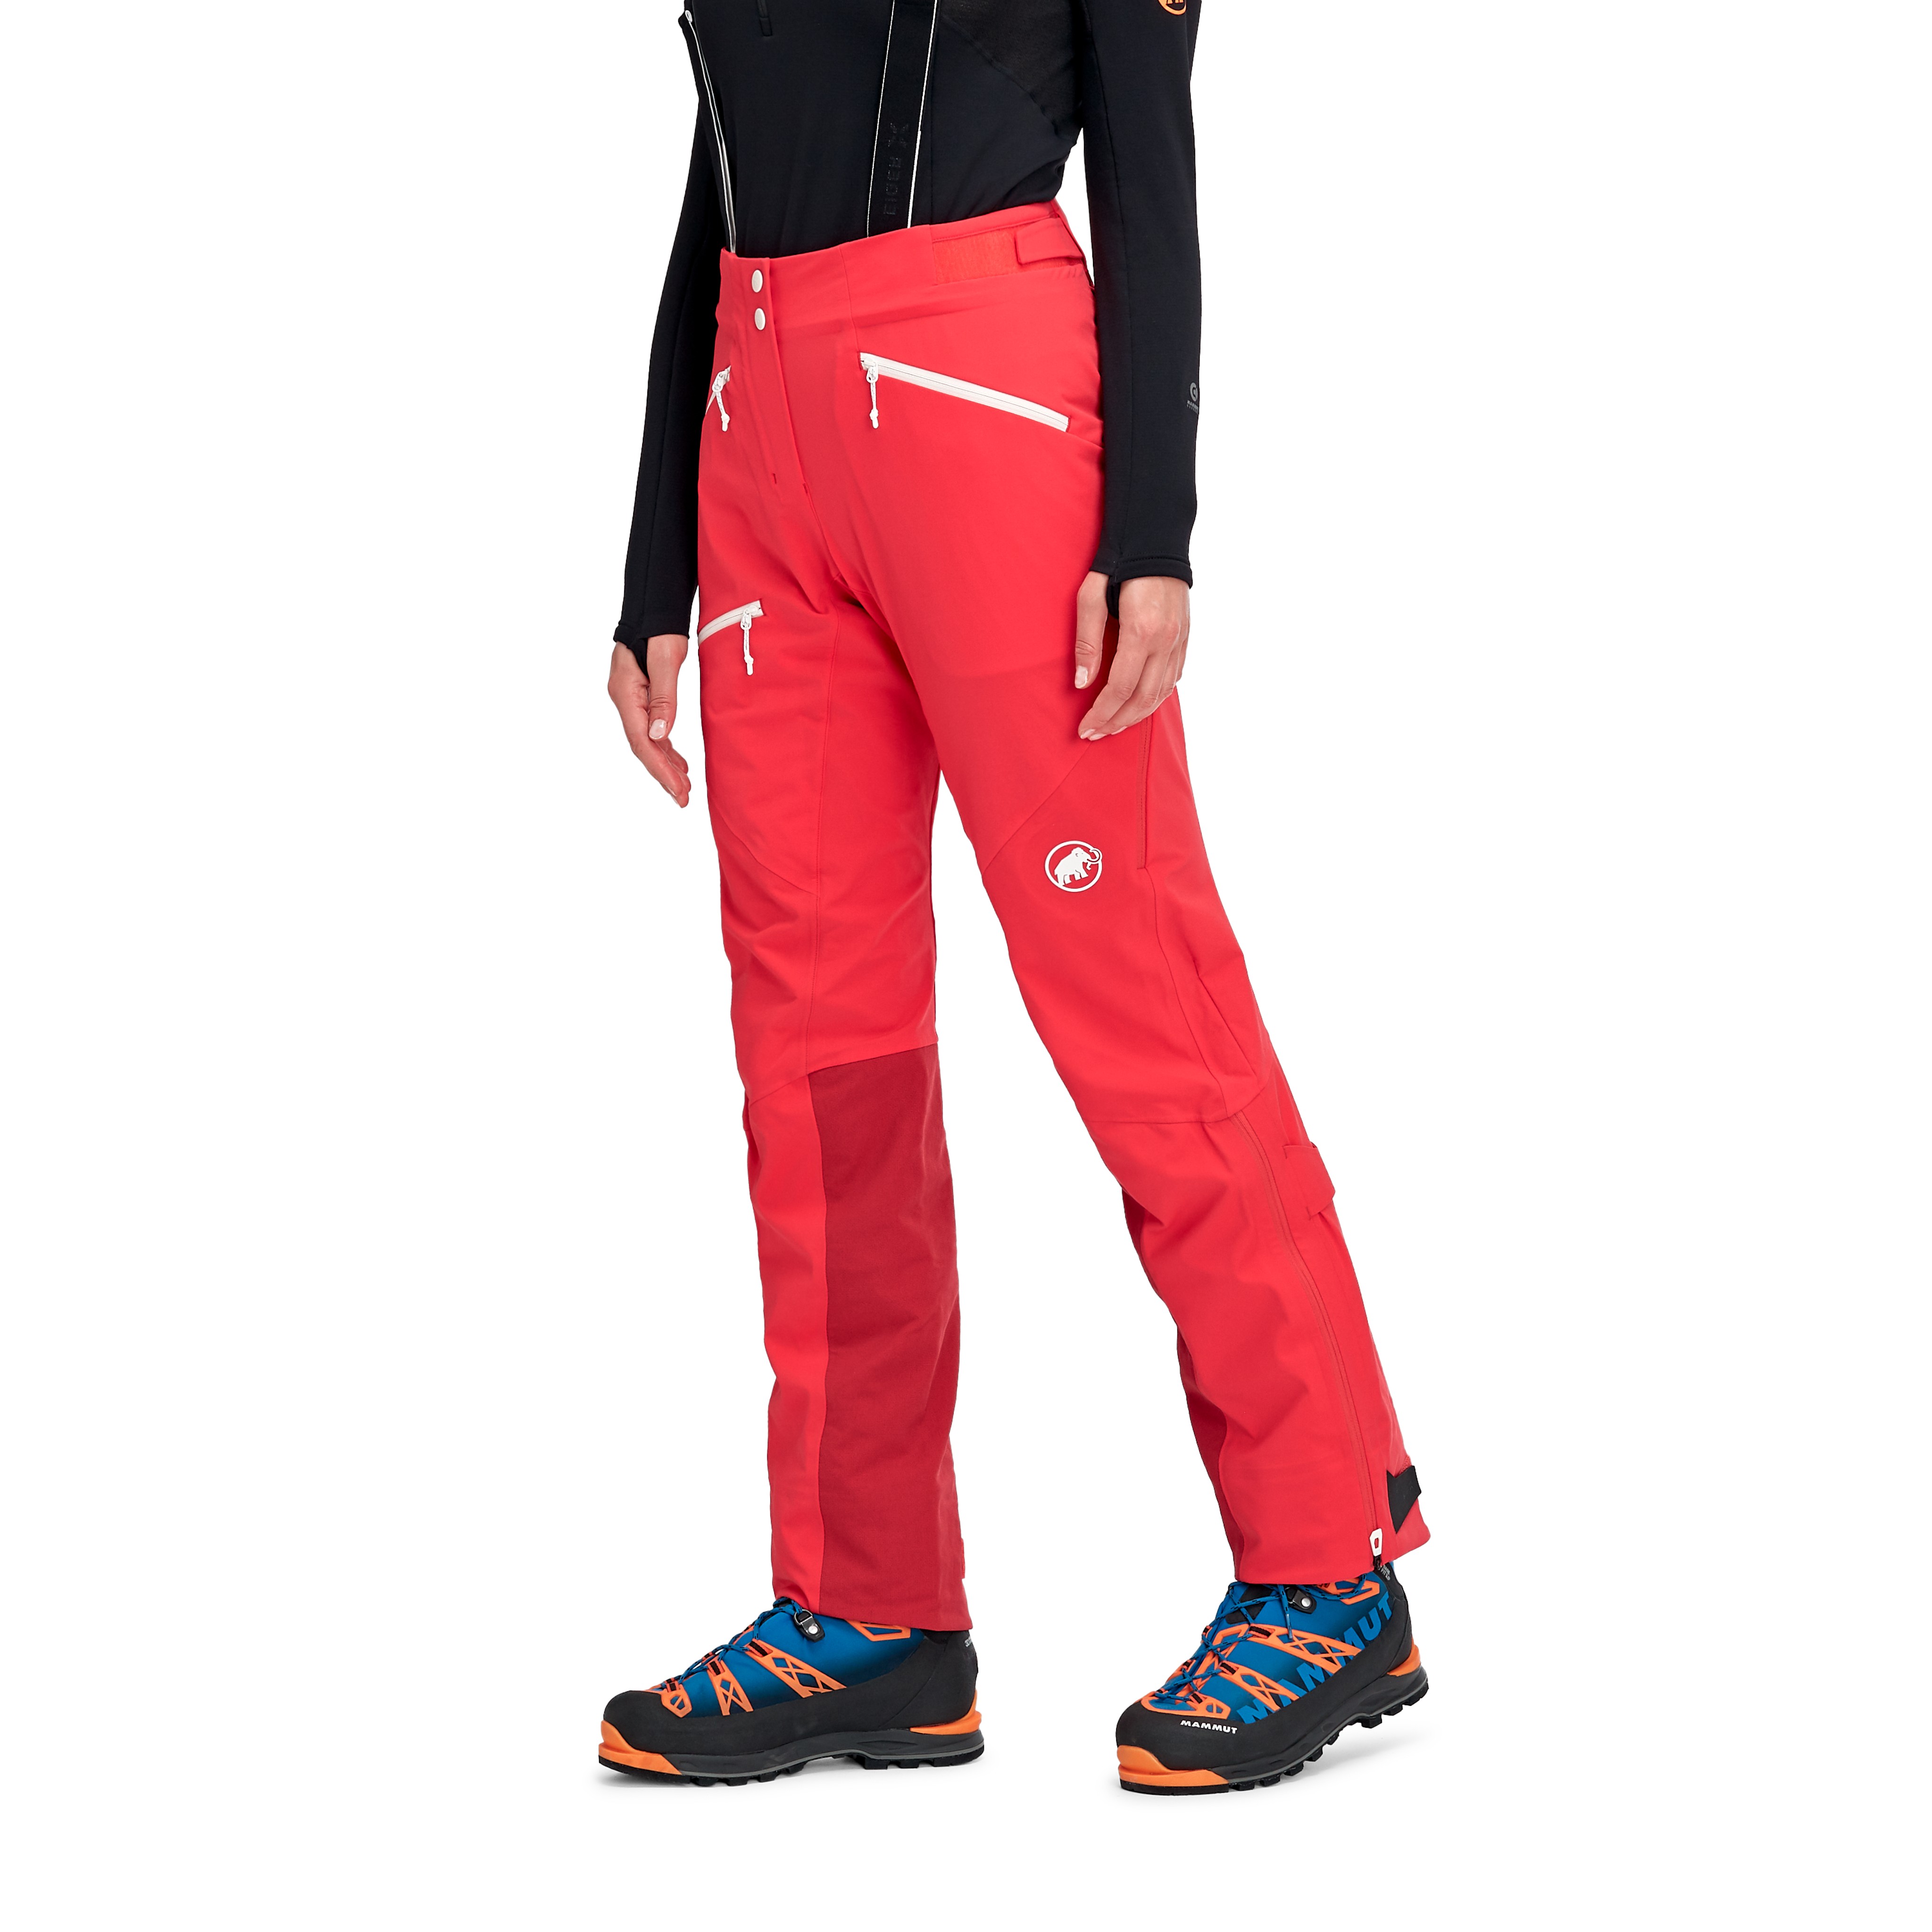 Eisfeld Guide SO Pants Women product image